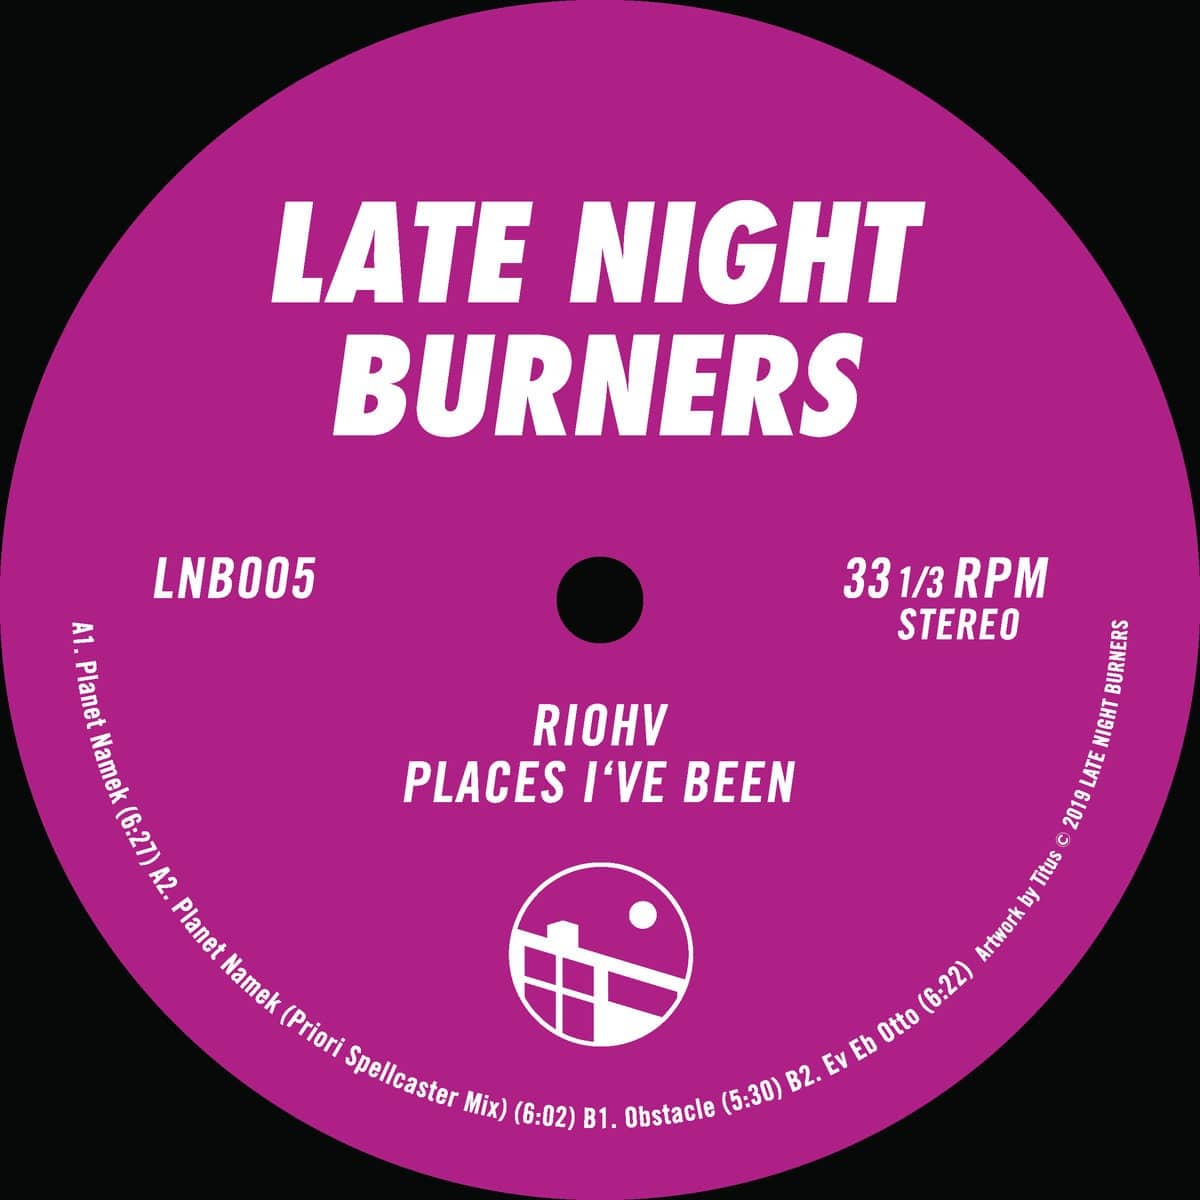 Riohv - Place I've Been Ep - LNB005 - LATE NIGHT BURNERS